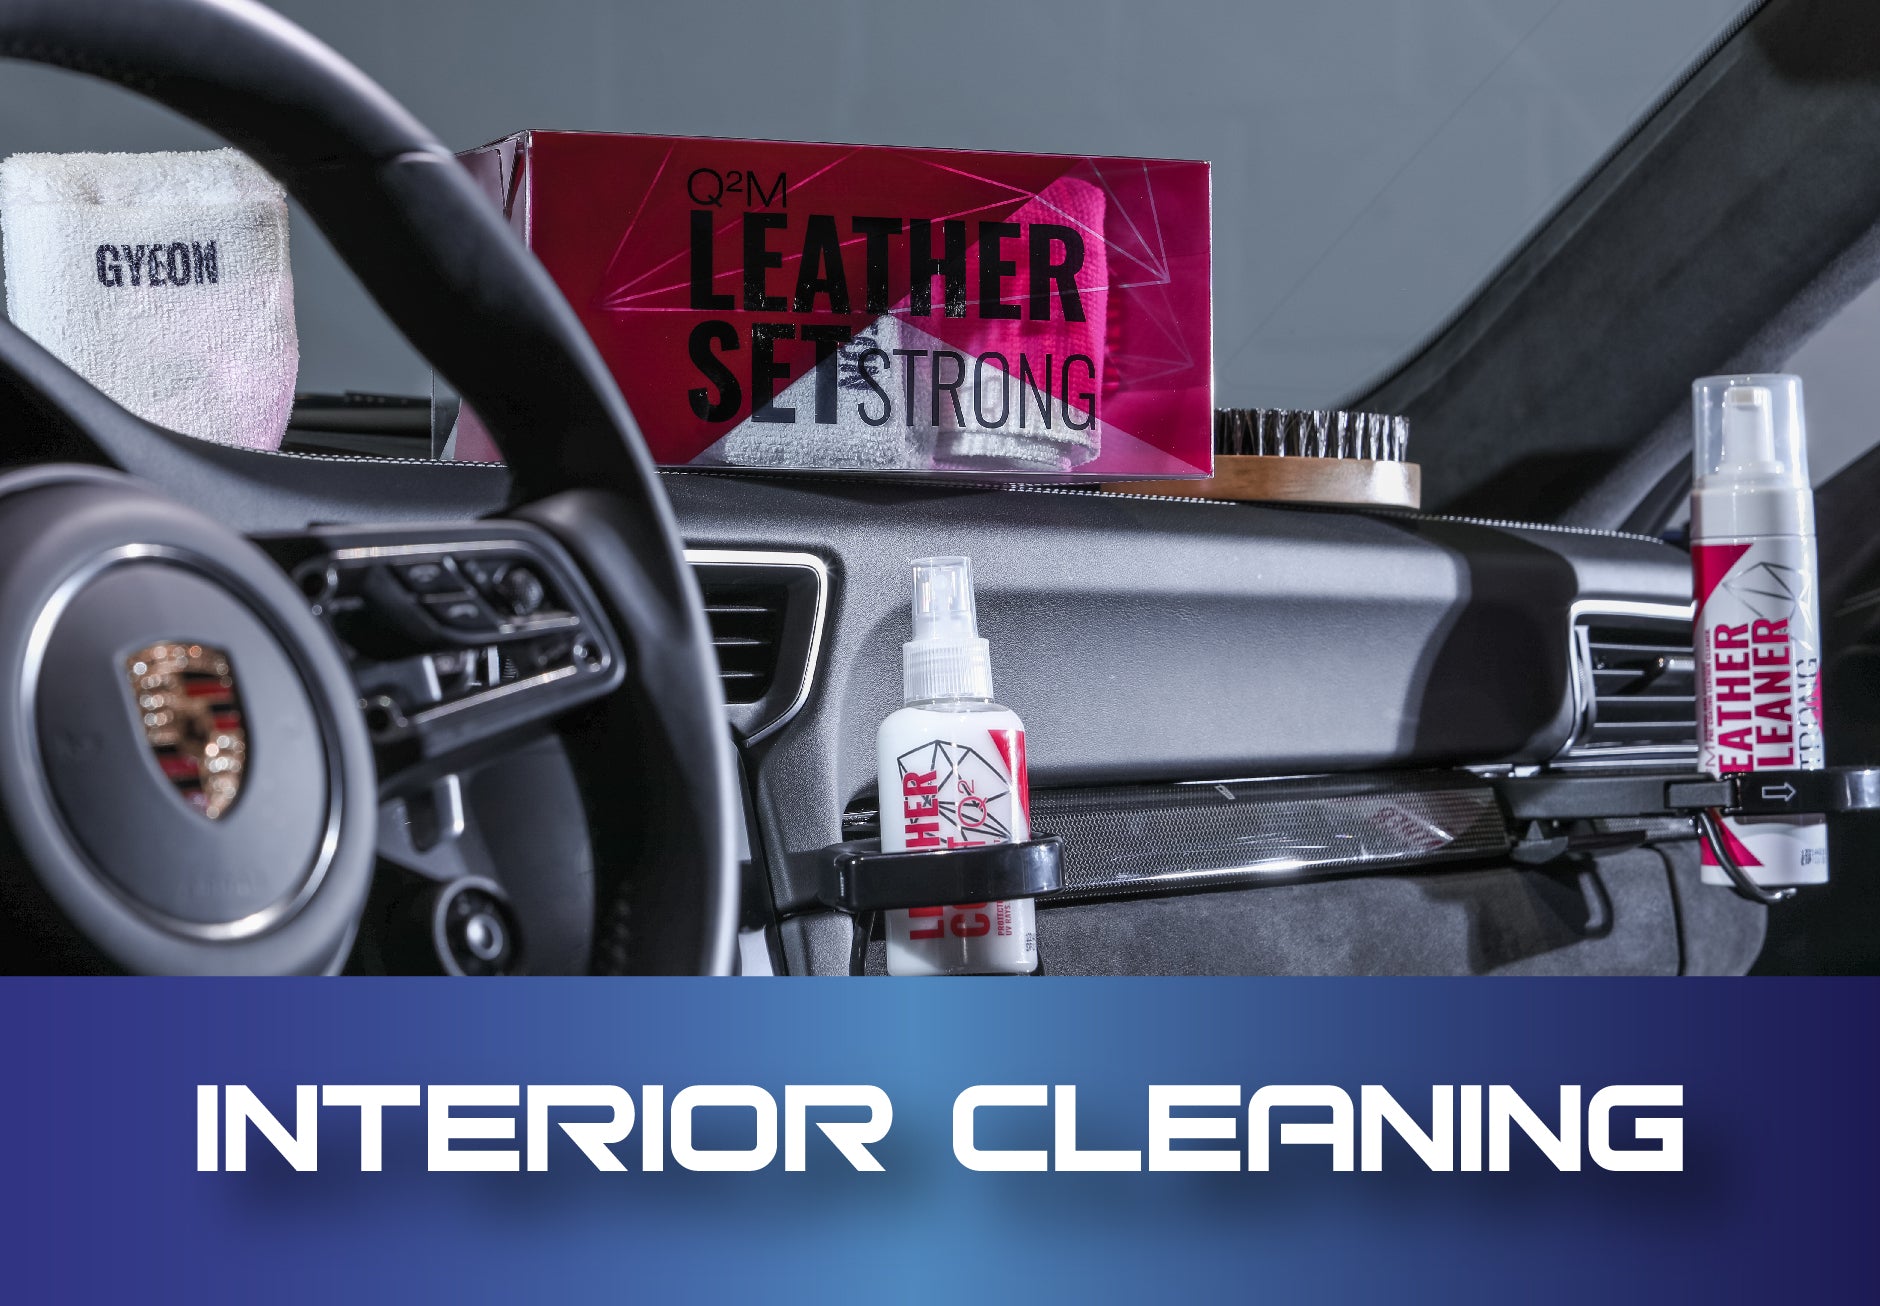 Stoner  Iron Remover & Wheel Cleaner – Car Supplies Warehouse